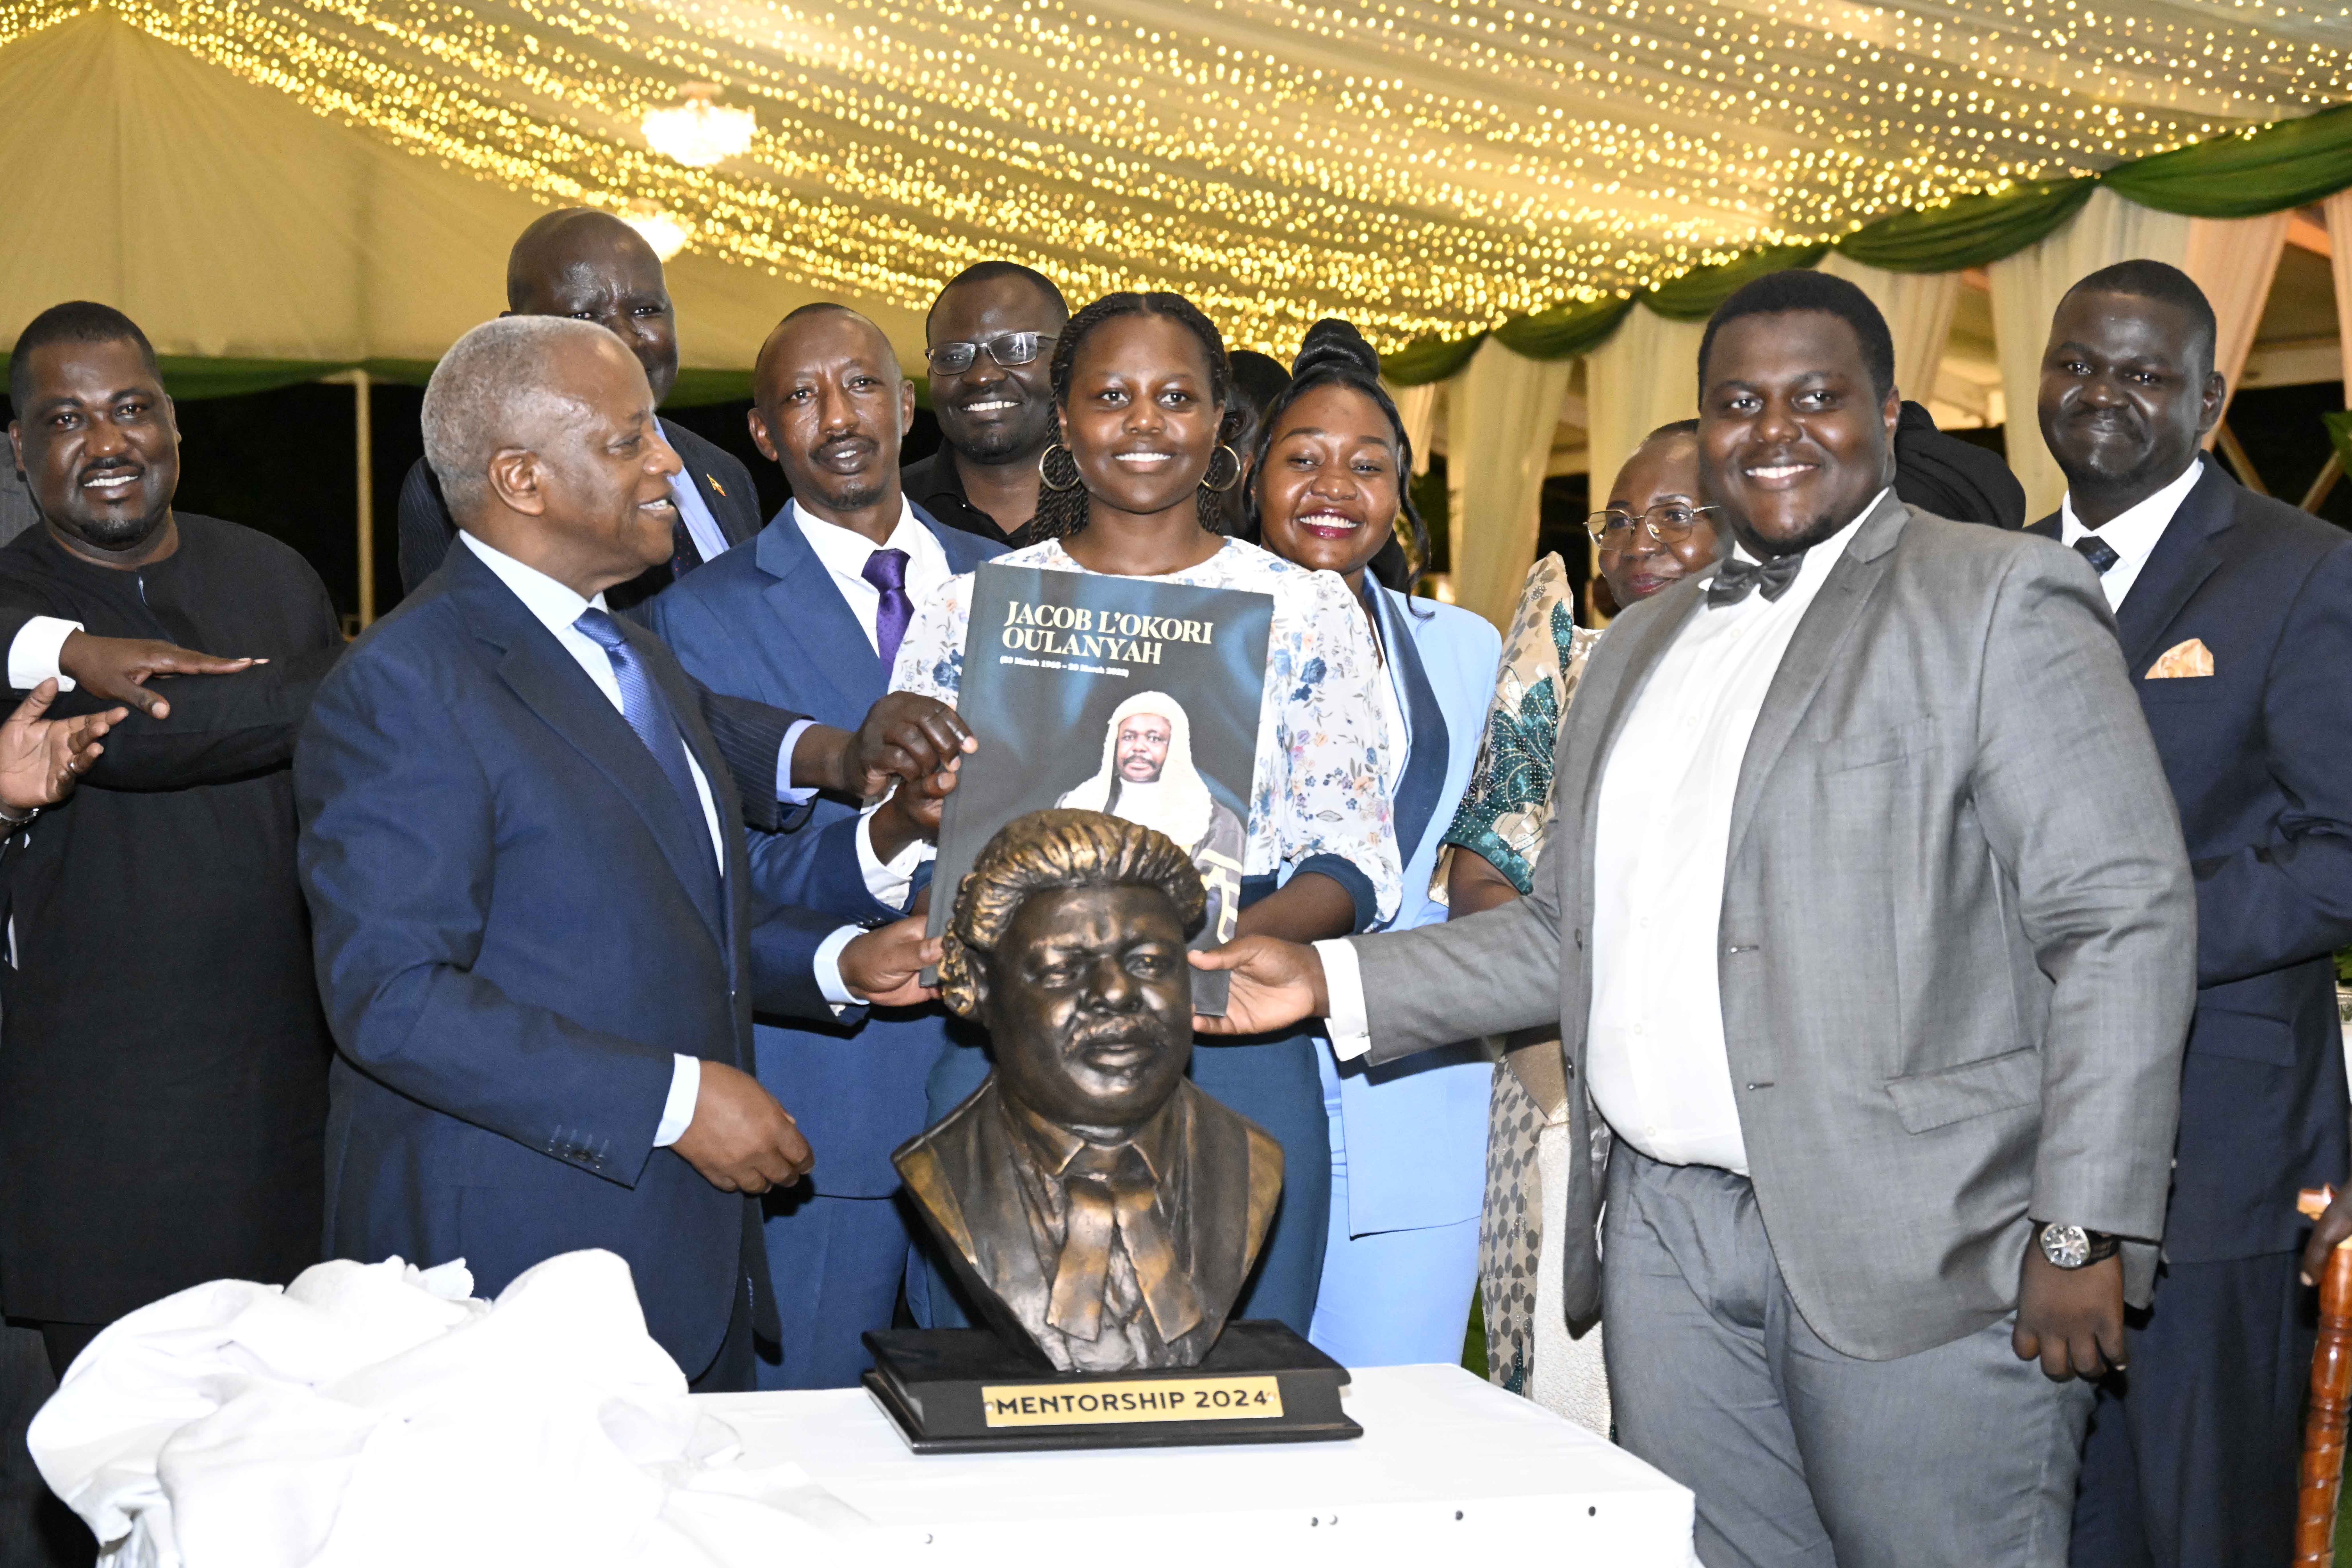 If you do not celebrate heroes, society is let down- Museveni